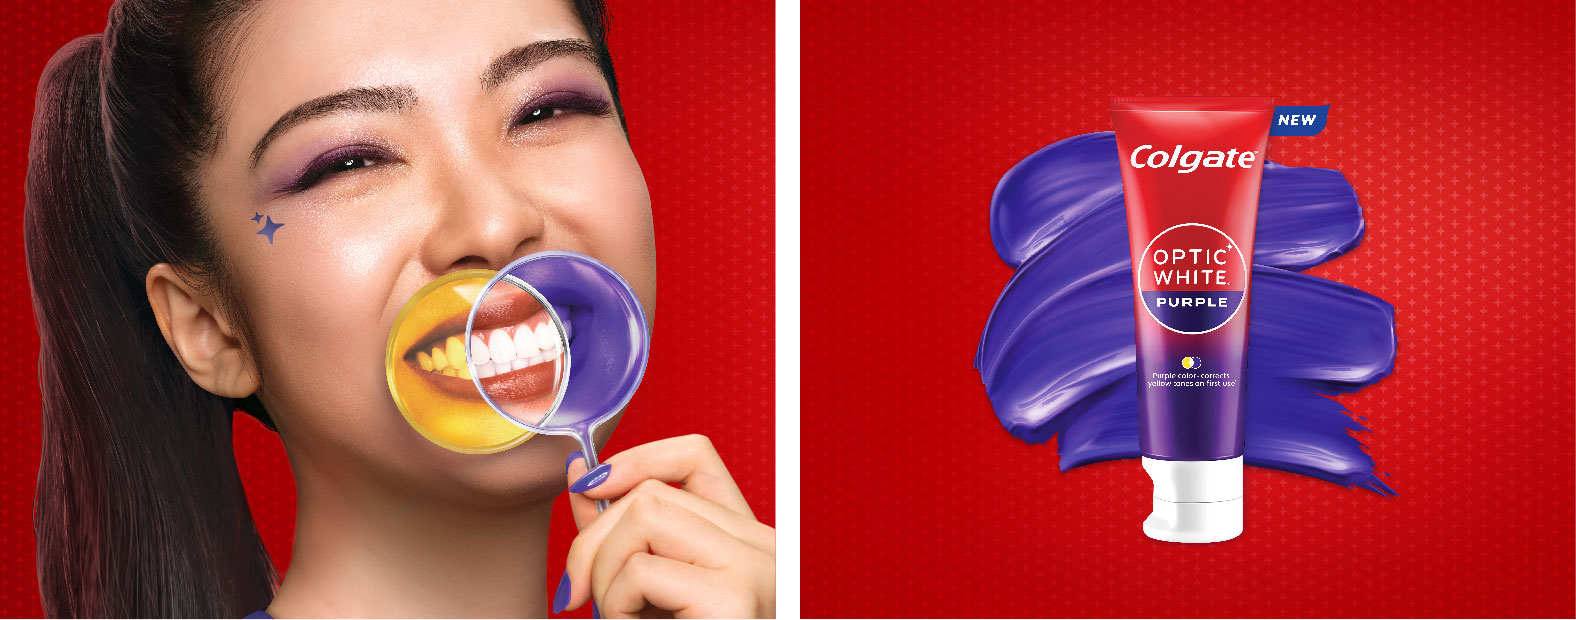 colgate unveils its first ever purple toothpaste colgate optic white purple